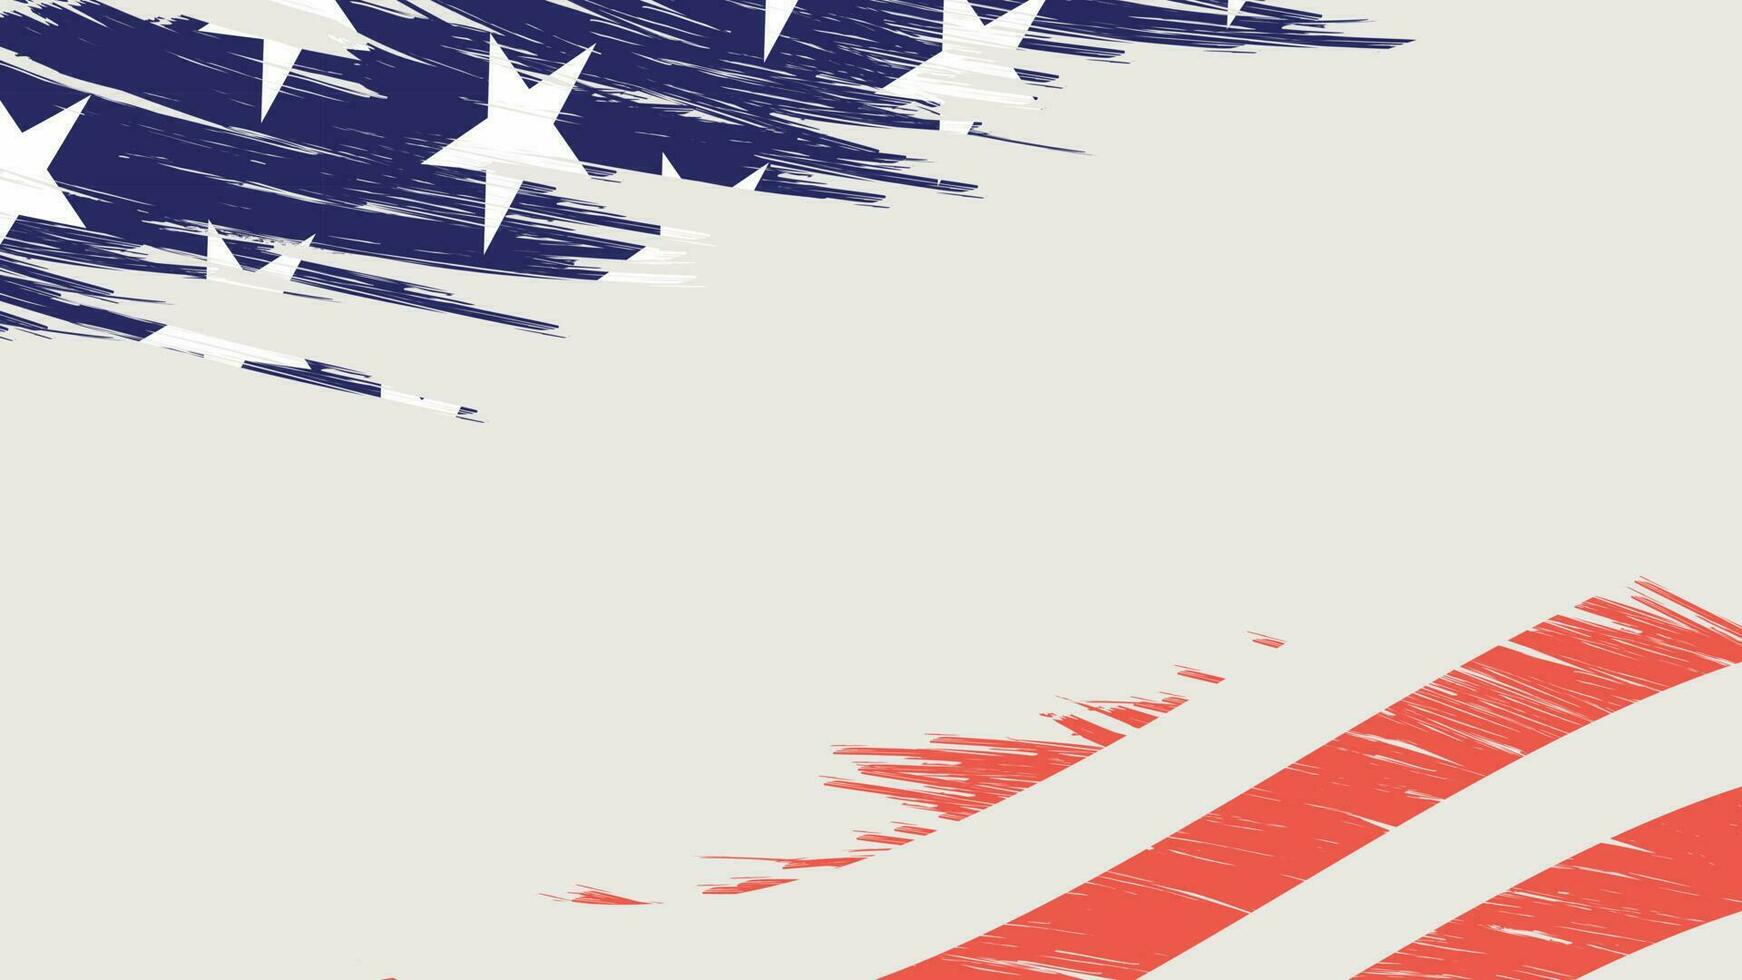 grunge texture background with american flag vector